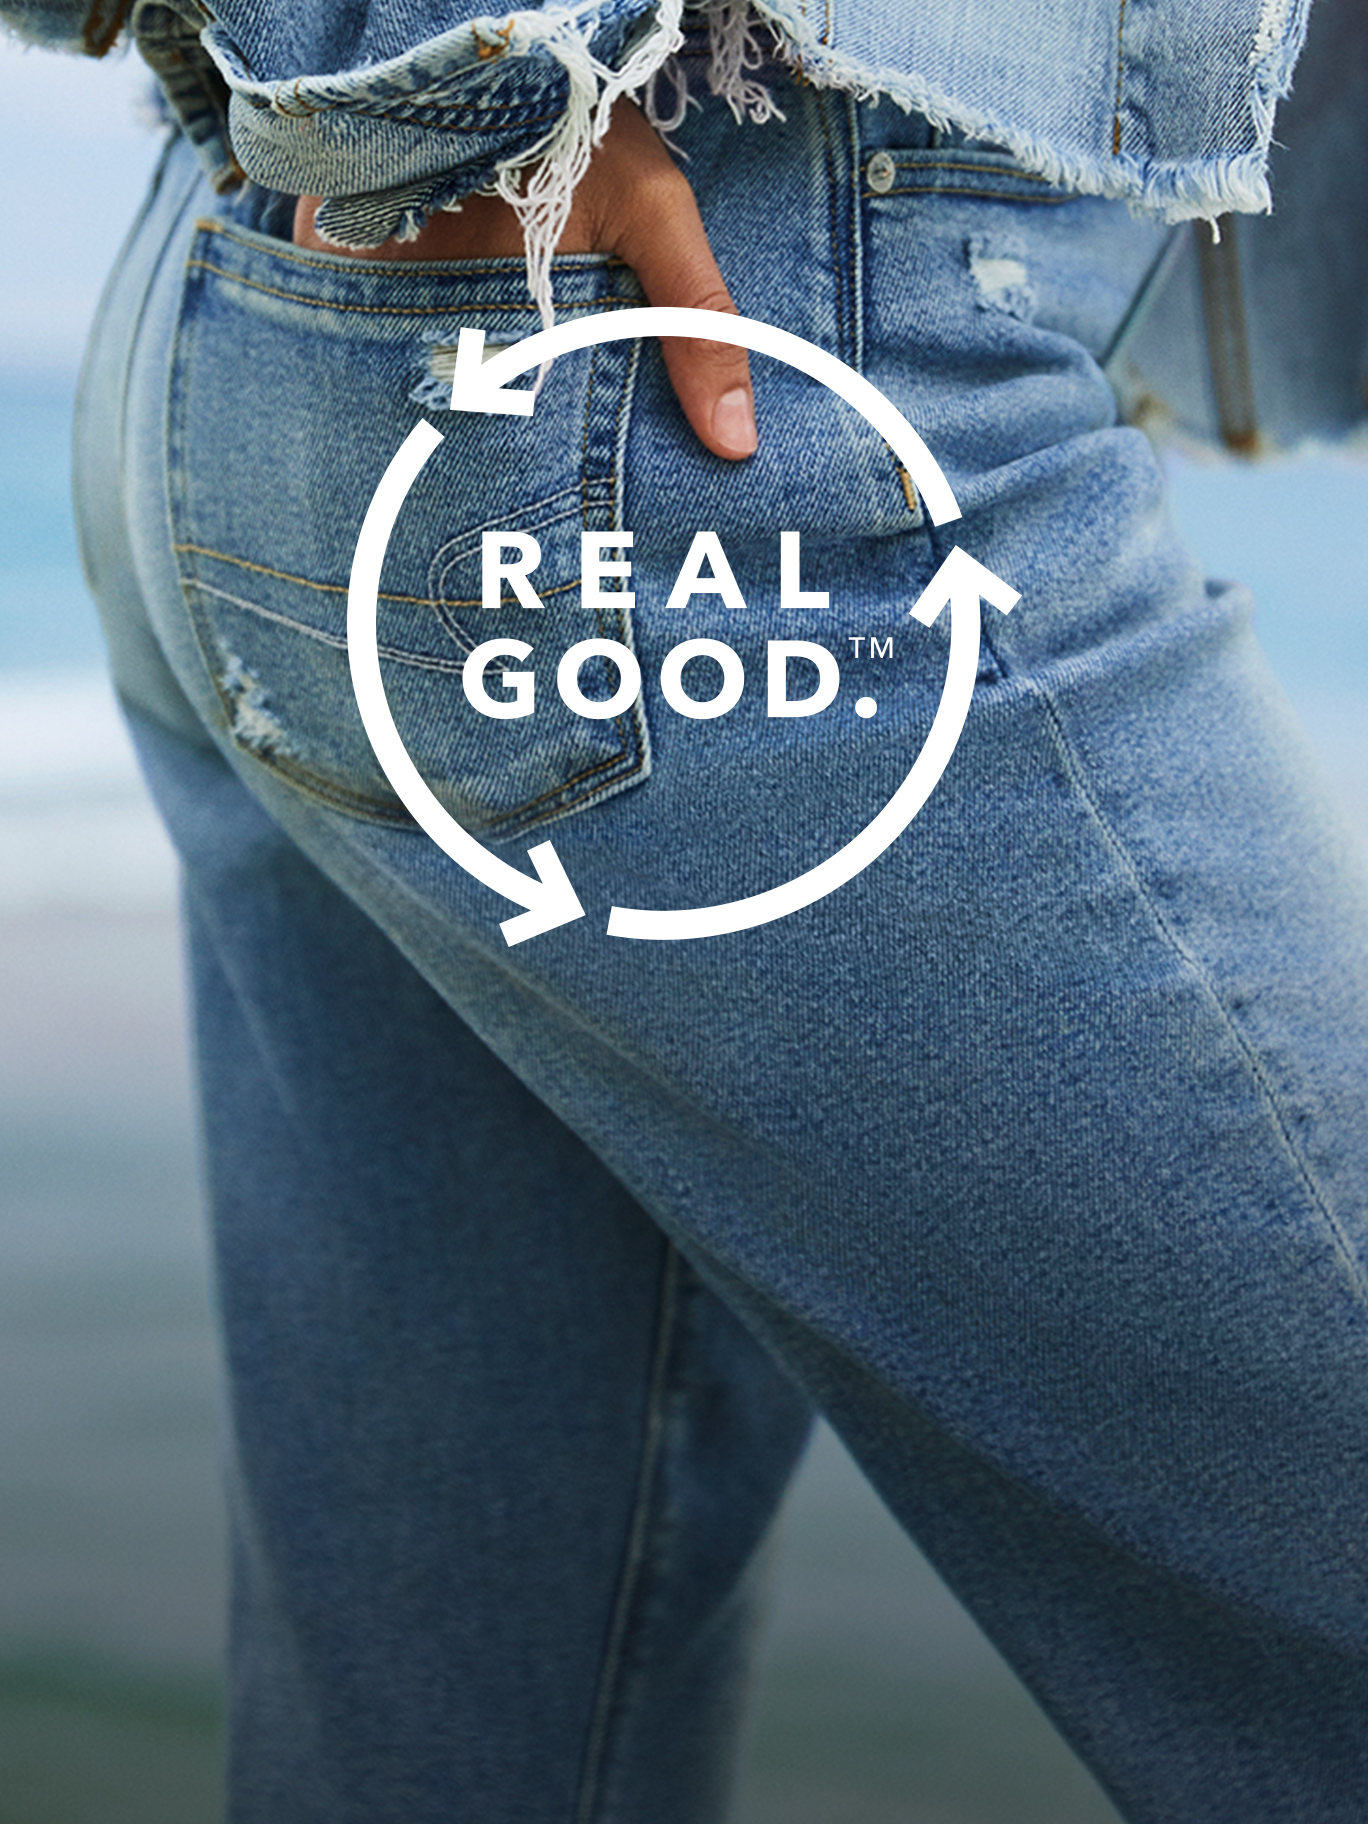 Real Good: Made with the planet in mind. - #AEJeans